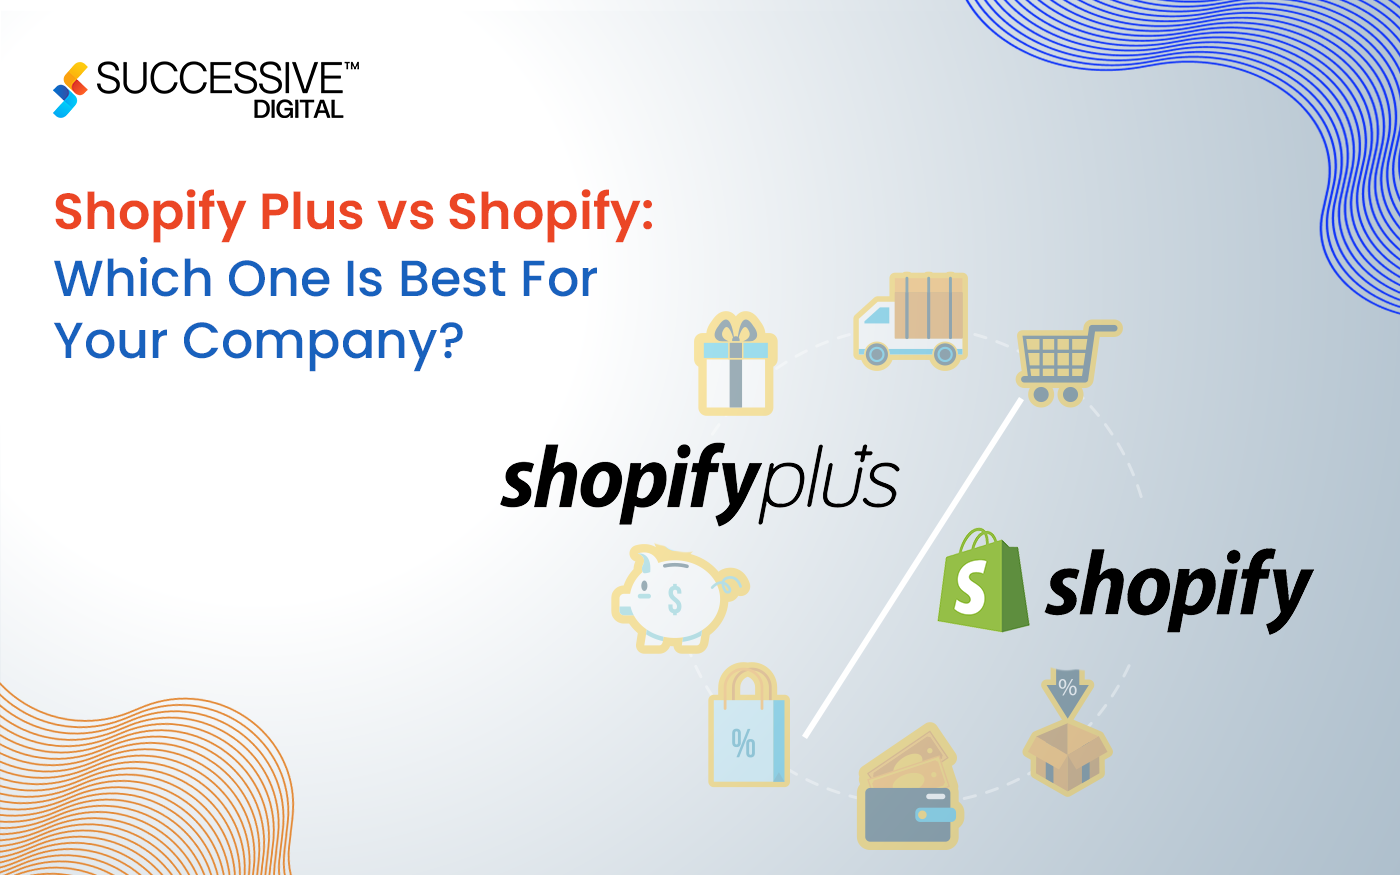 Shopify Plus vs Shopify: Which One Is Best For Your Company?